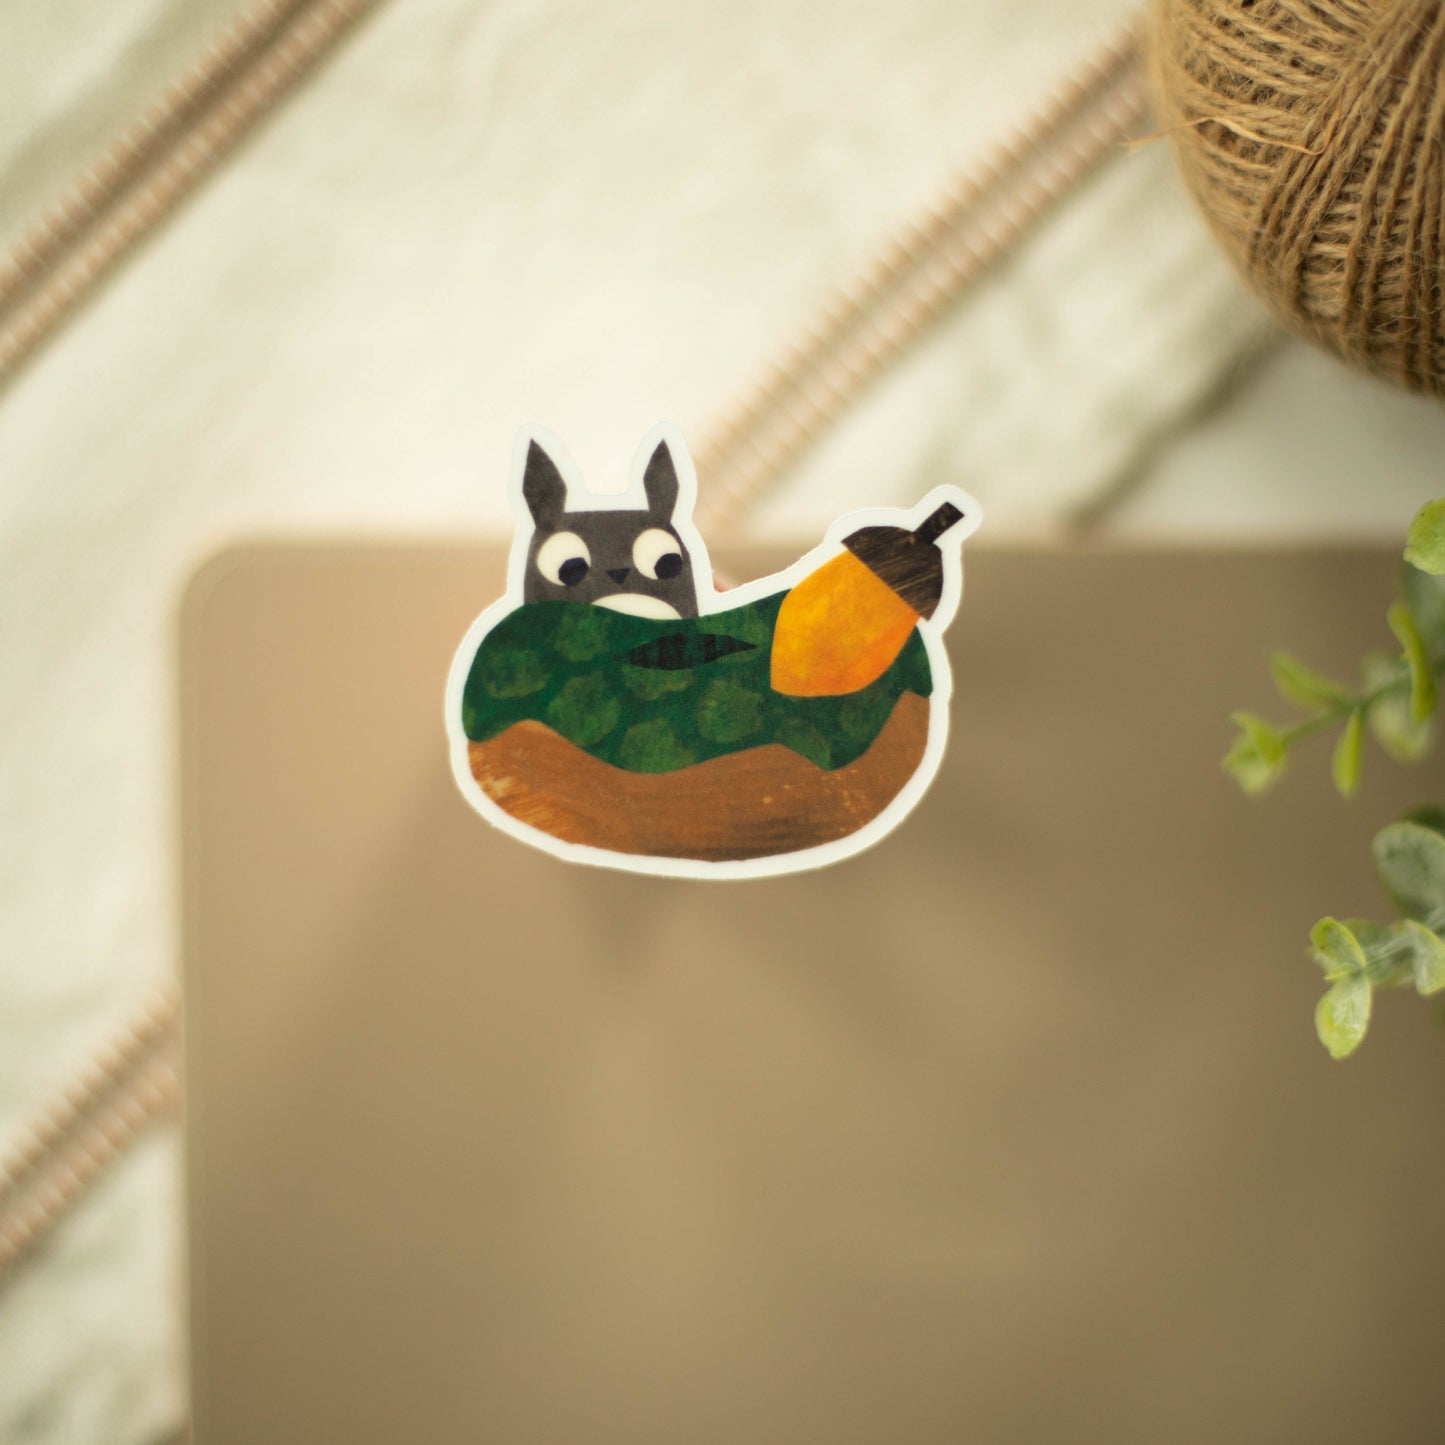 A clear sticker of a squirrel looking at an acorn on a fancy background